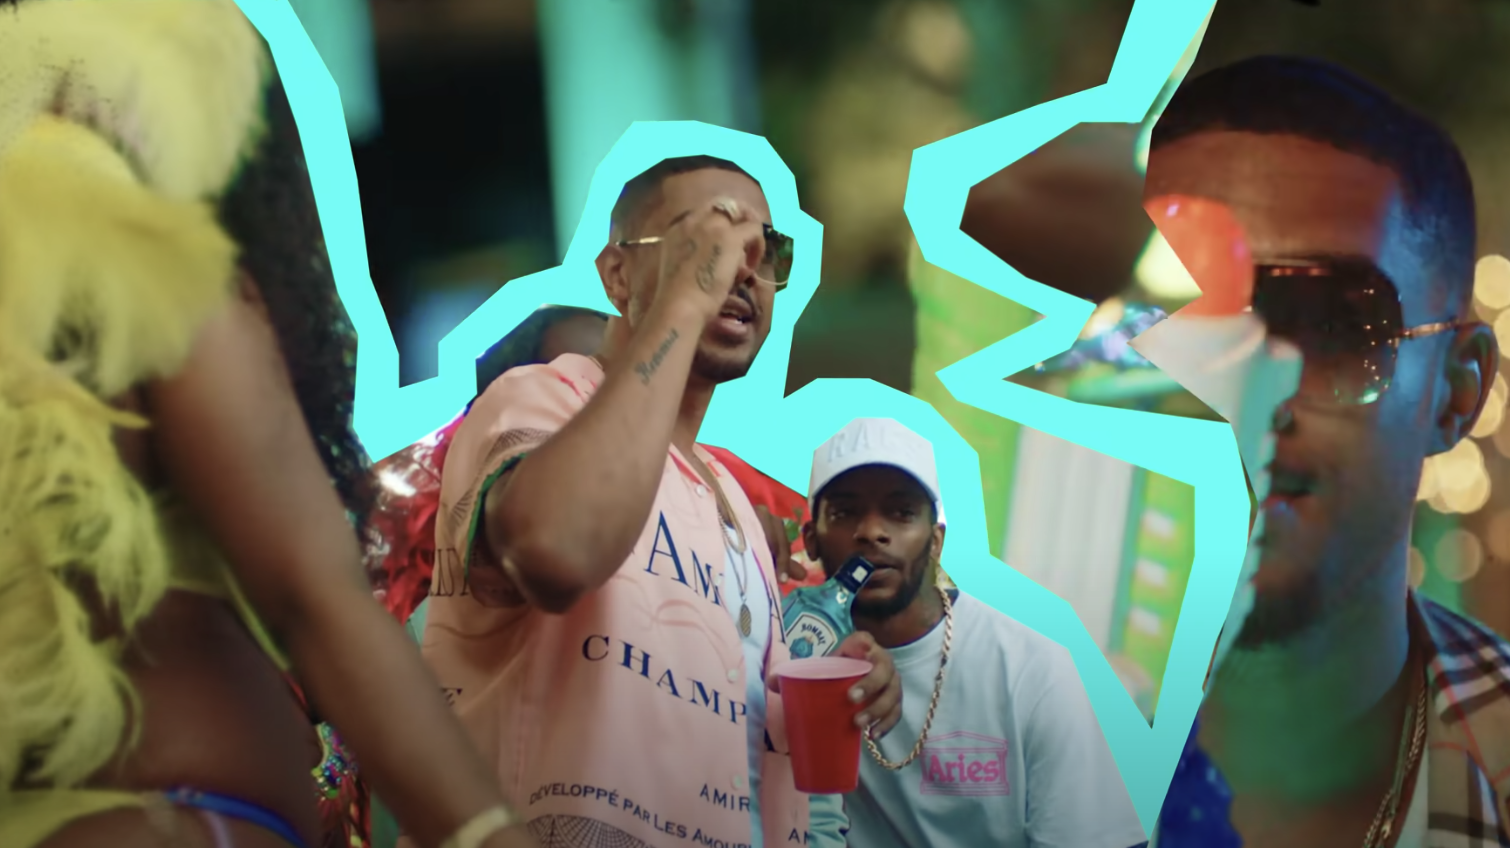 SPOTTED: WSTRN in Carnivalesque Music Video for ‘Come Around’